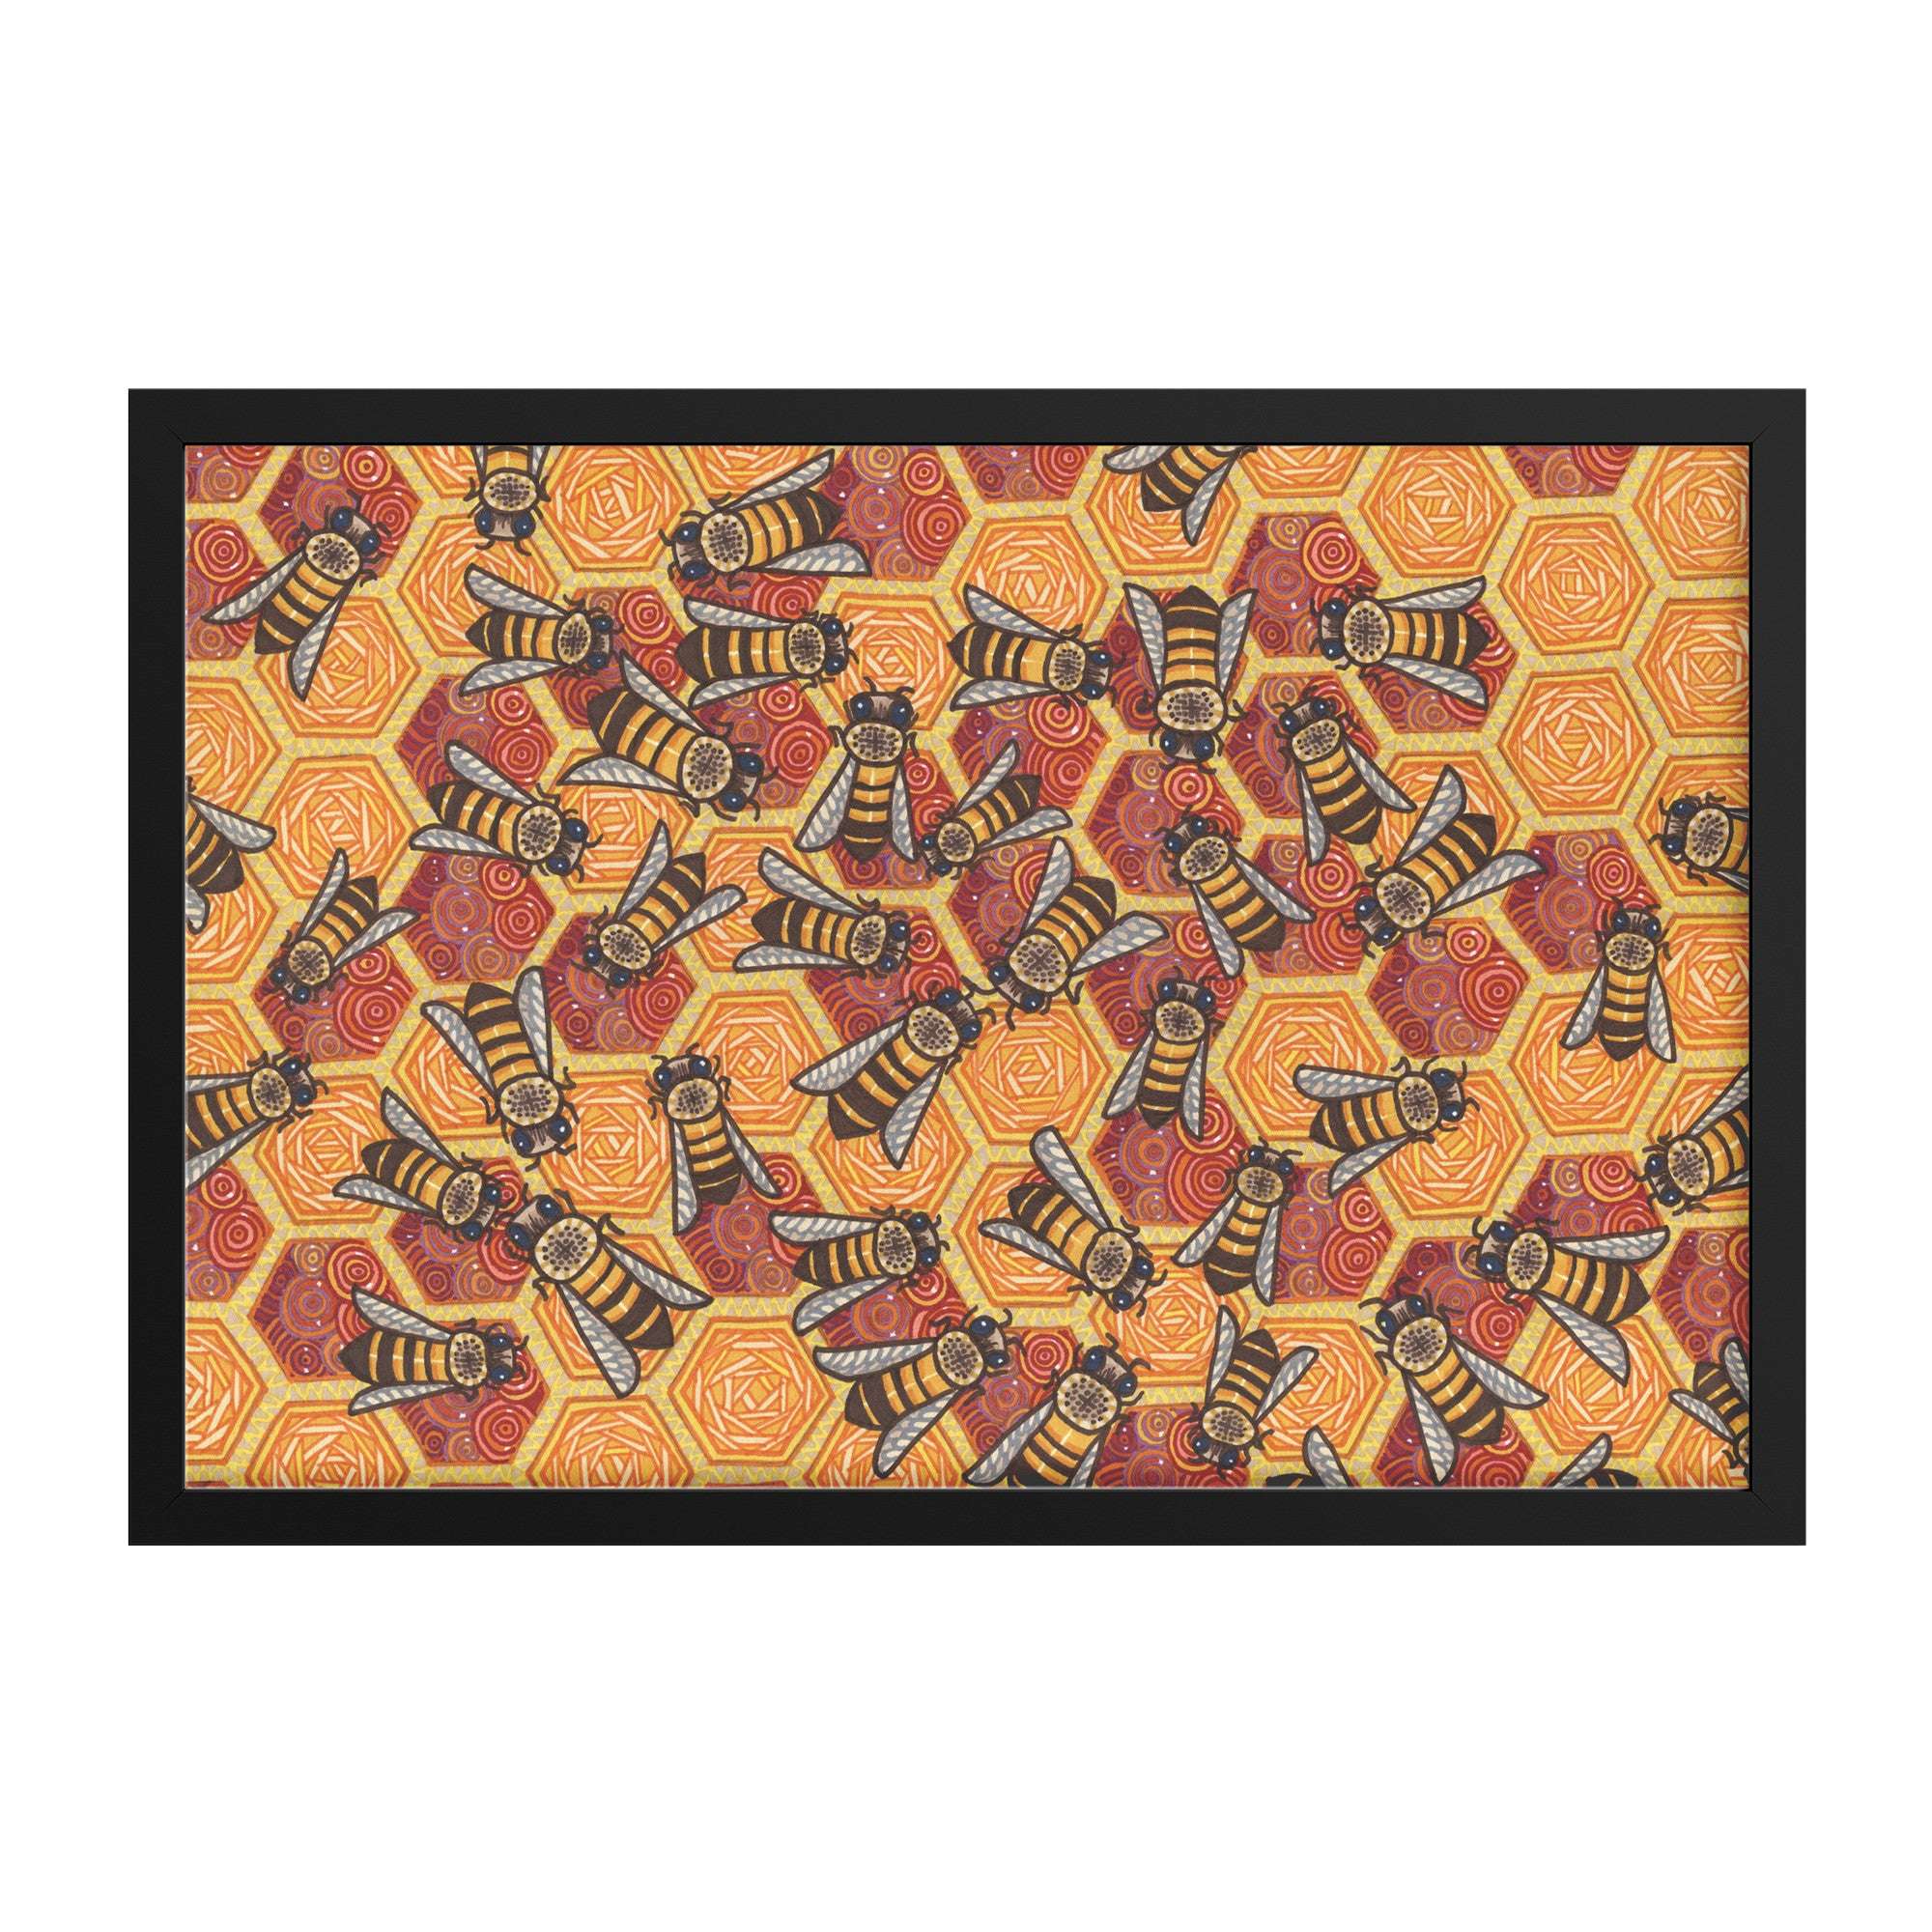 Honeycomb Harmony Framed Print featuring a zentangle painting design with repeated patterns of stylized bees on a multicolored, textured background, enclosed in a black frame.